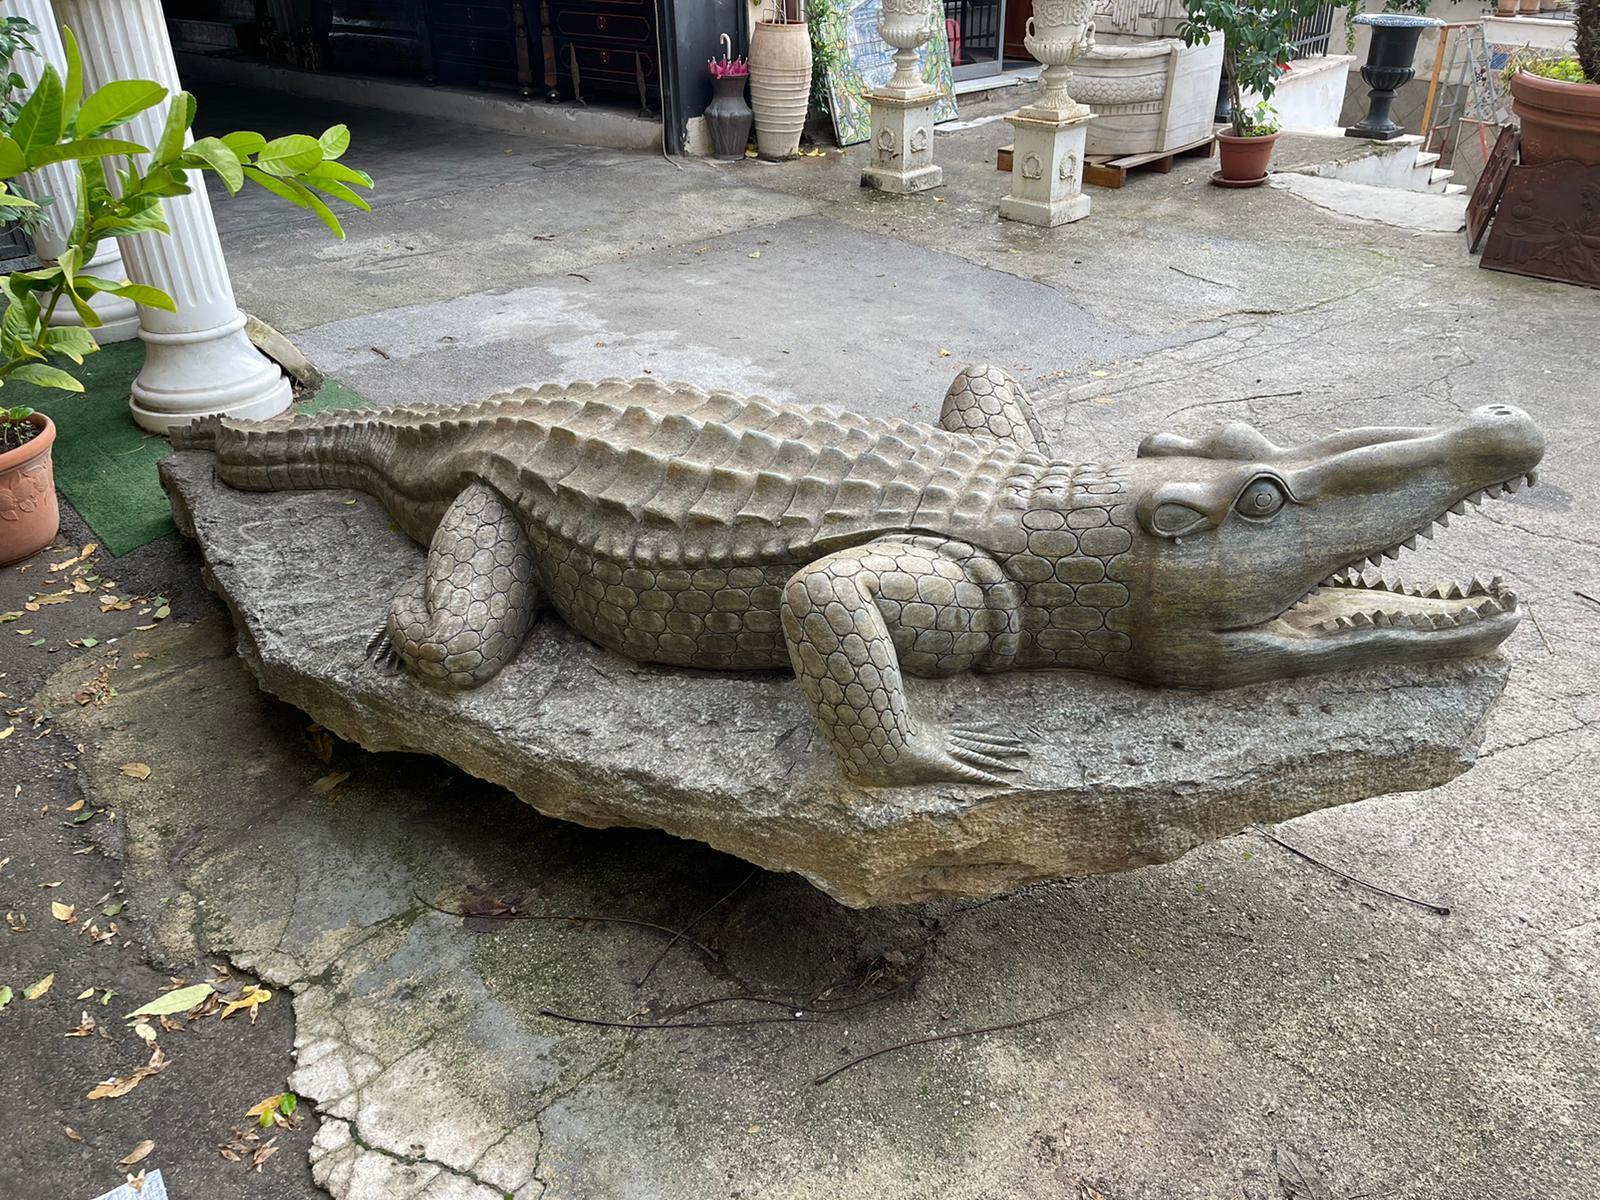 Large sculpture made of green marble, depicting a crocodile.

It was located in a villa in Tuscany, Italy, it is presented without defects except for the signs of the time.

The sculpture, finely sculpted by hand, down to the smallest detail, is